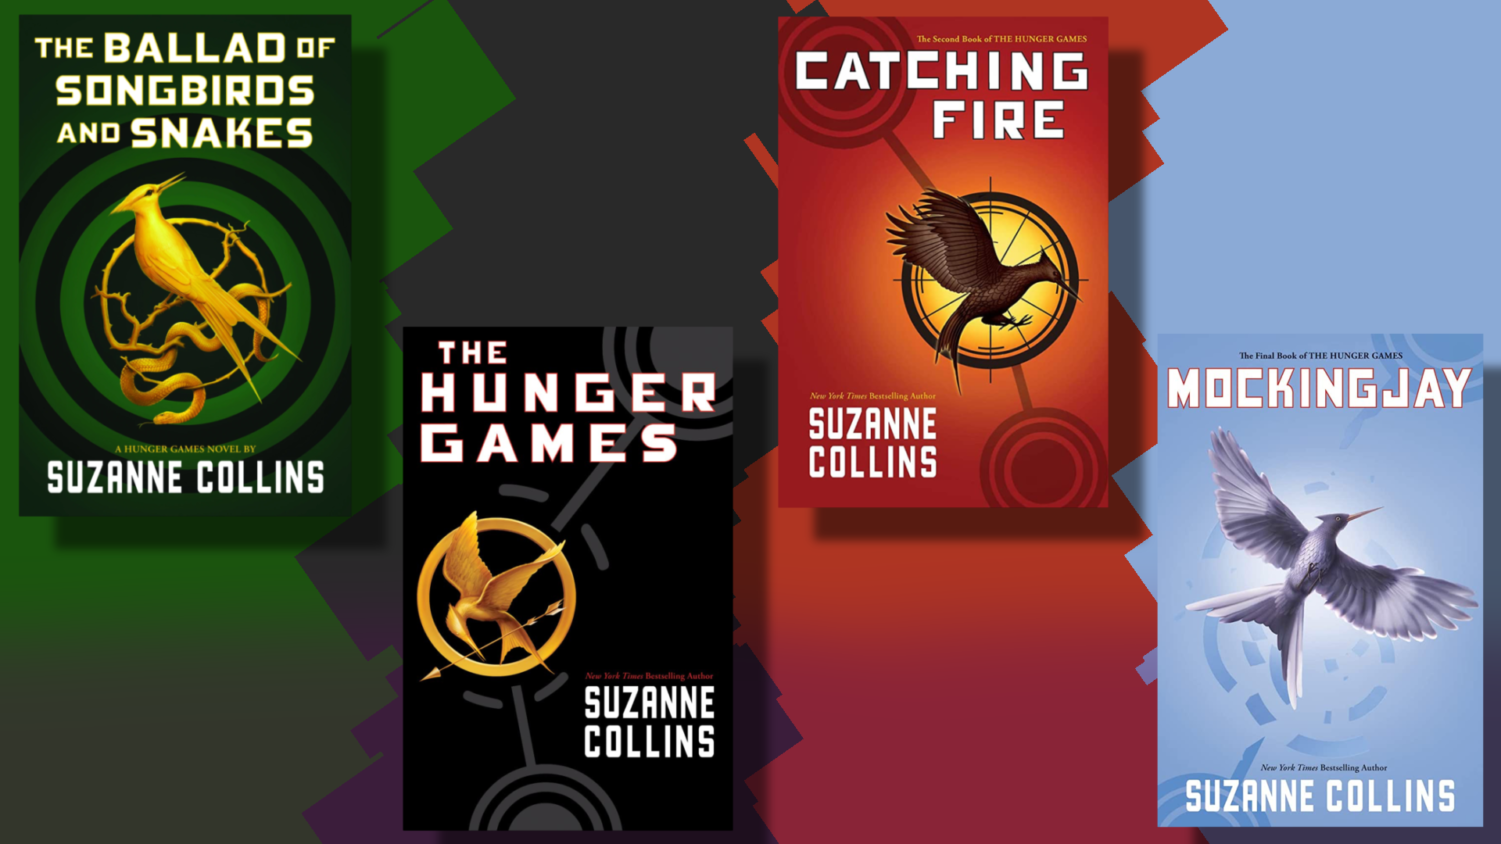 The Hunger Games' Prequel Is in the Works - The New York Times